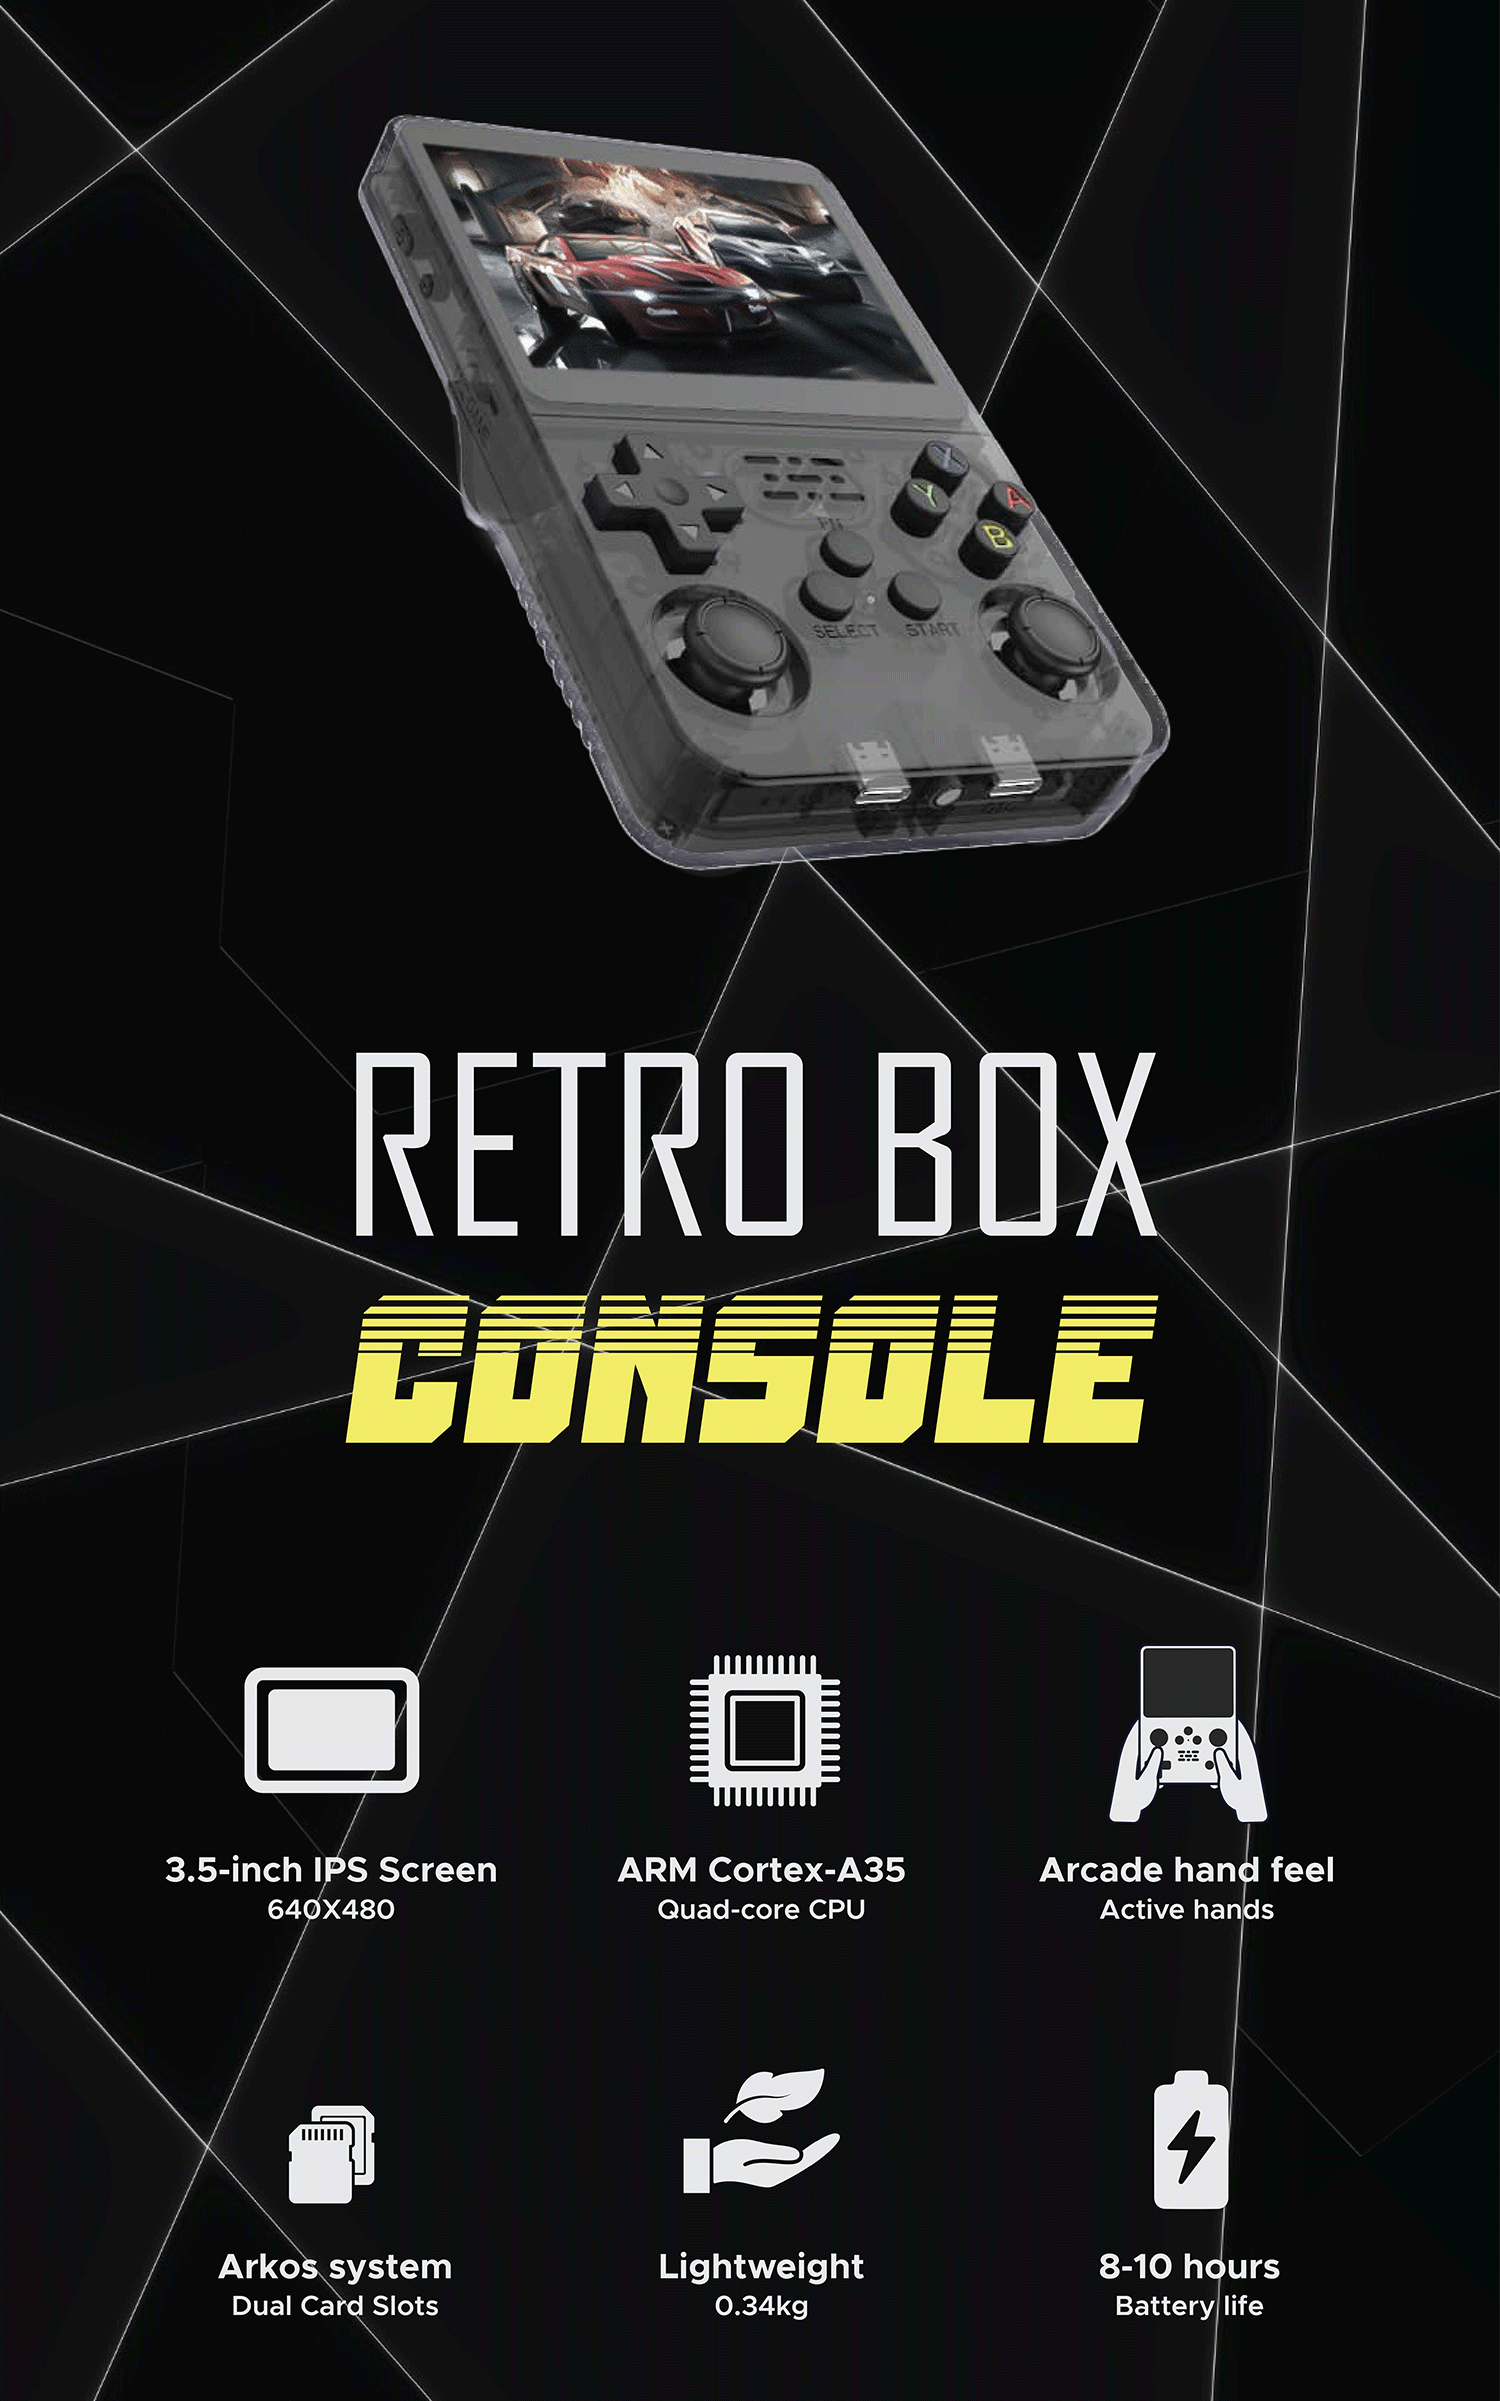 Retro Box Console Handheld Video Game Console Linux System 3.5 Inch IPS  Screen Portable Pocket Video Player 64GB built in 15,000 Games